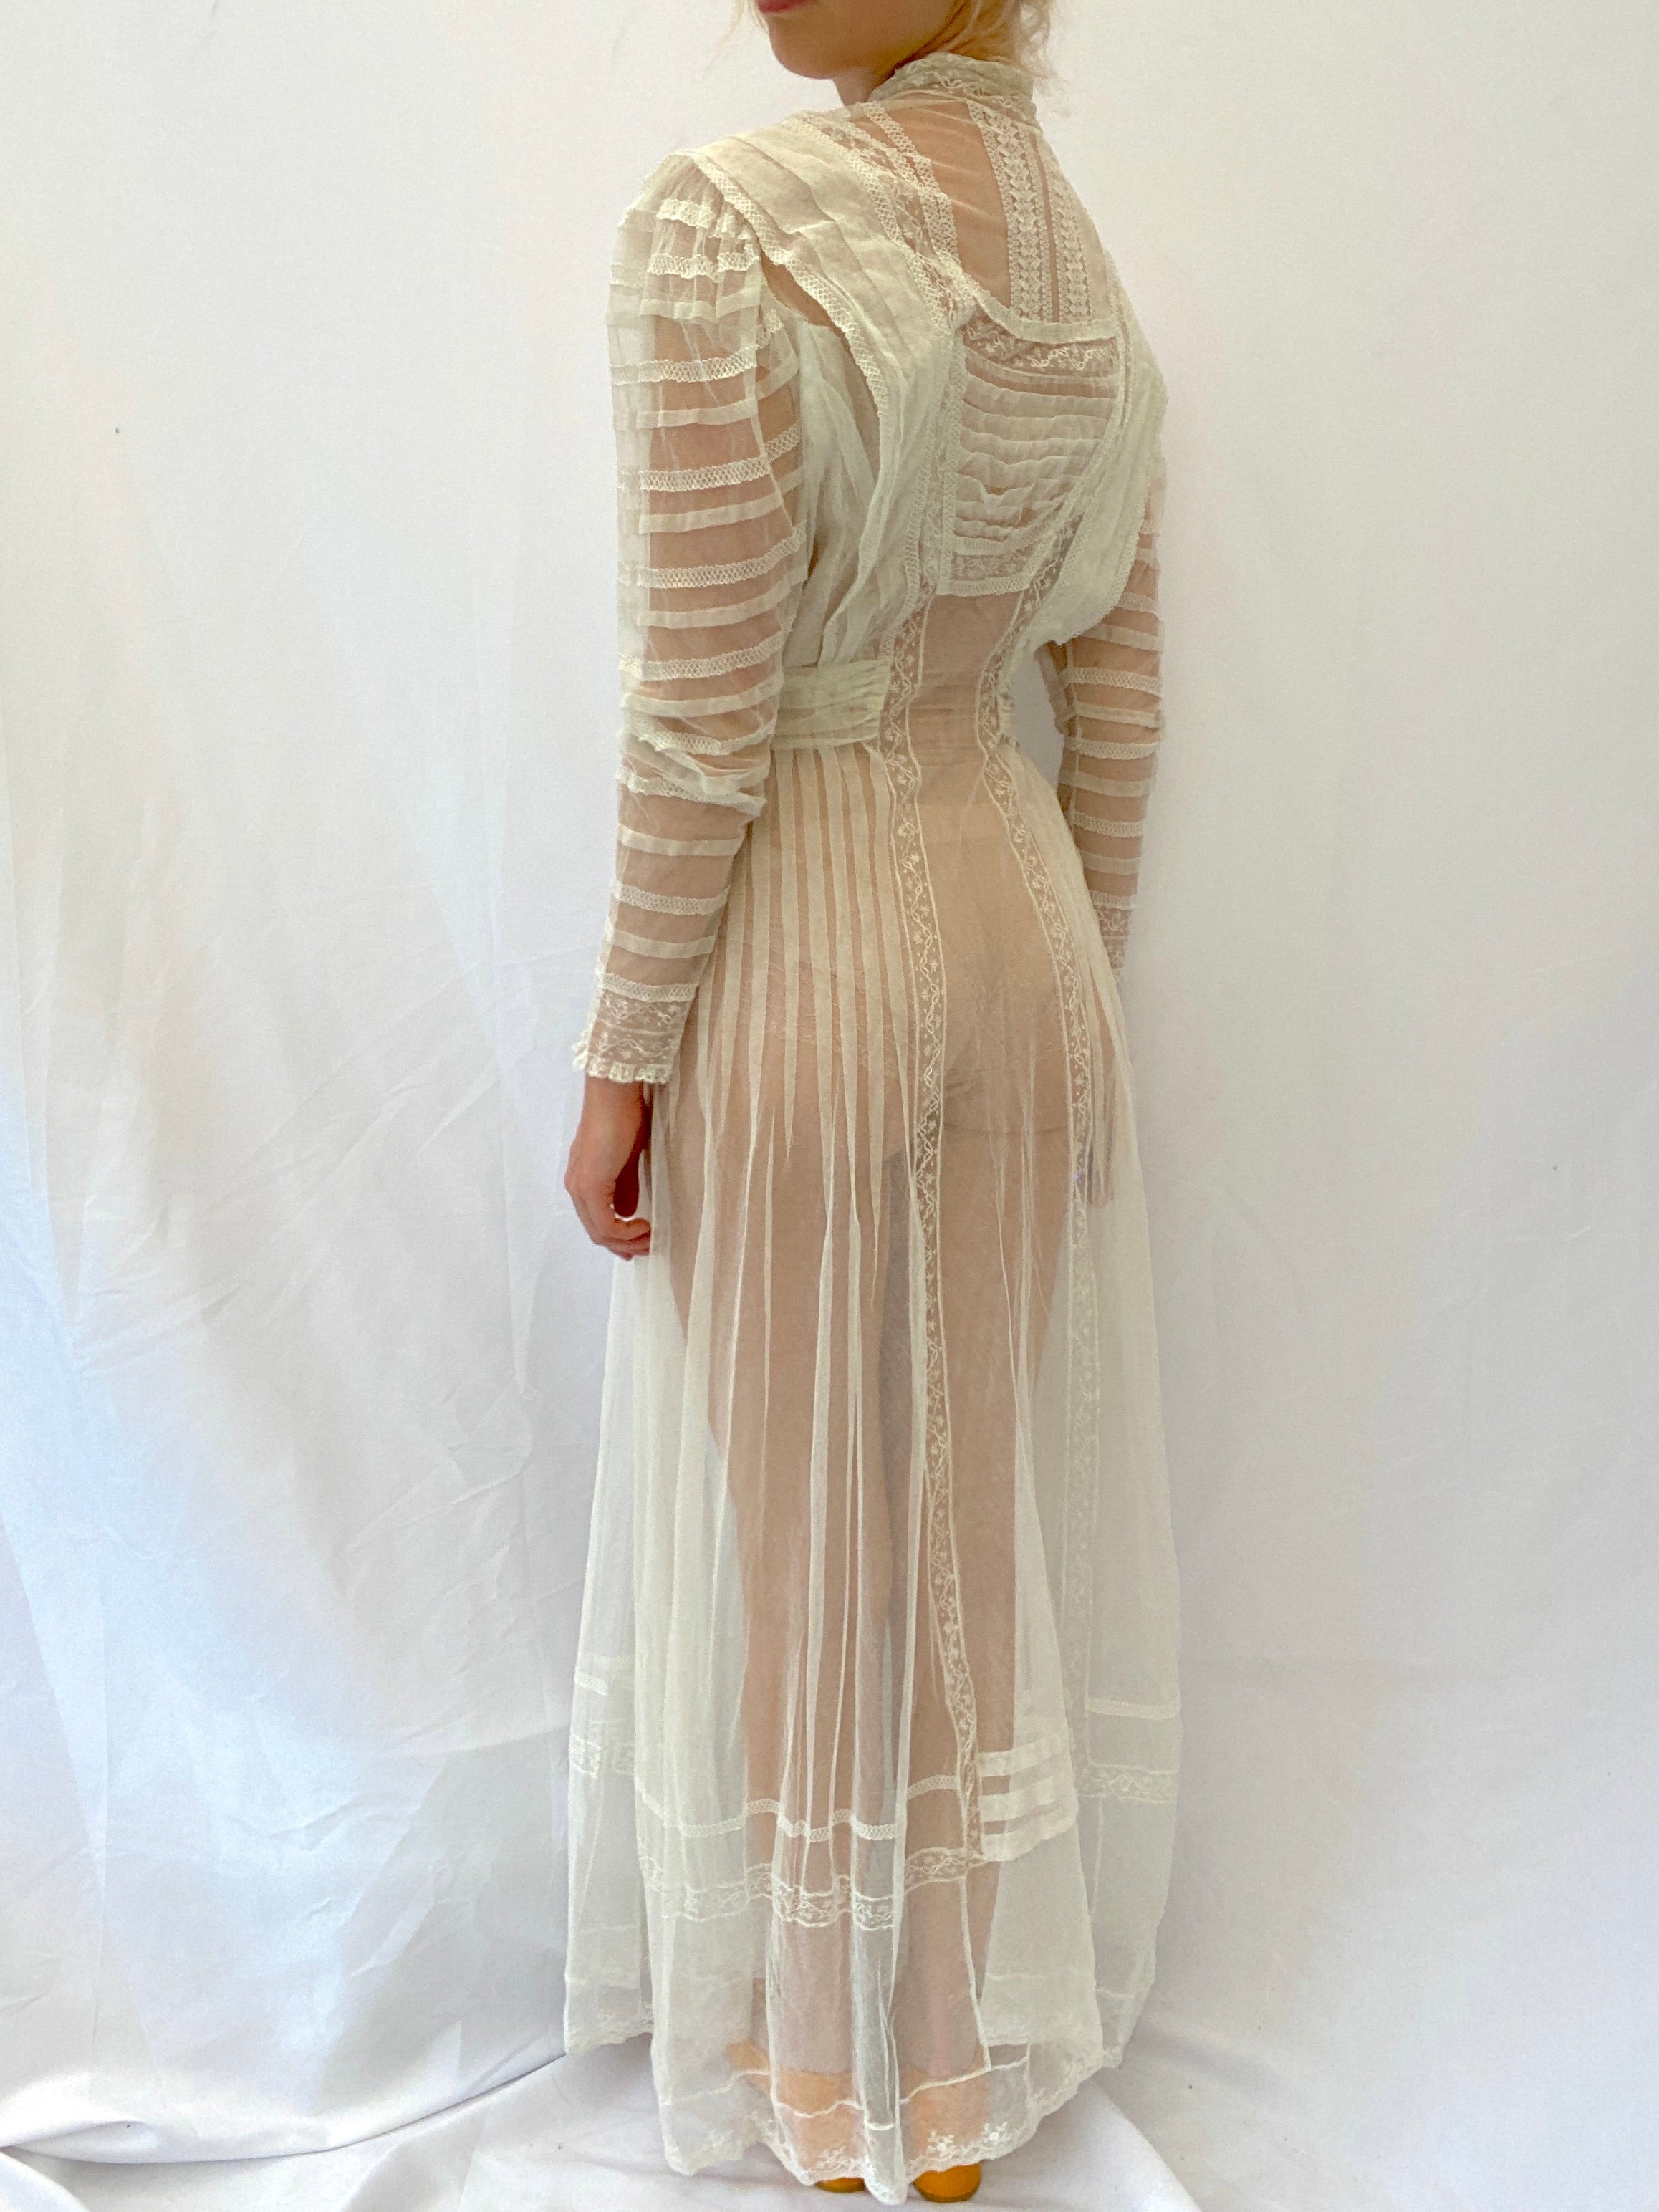 White Victorian Embroidered Net Lace Dress